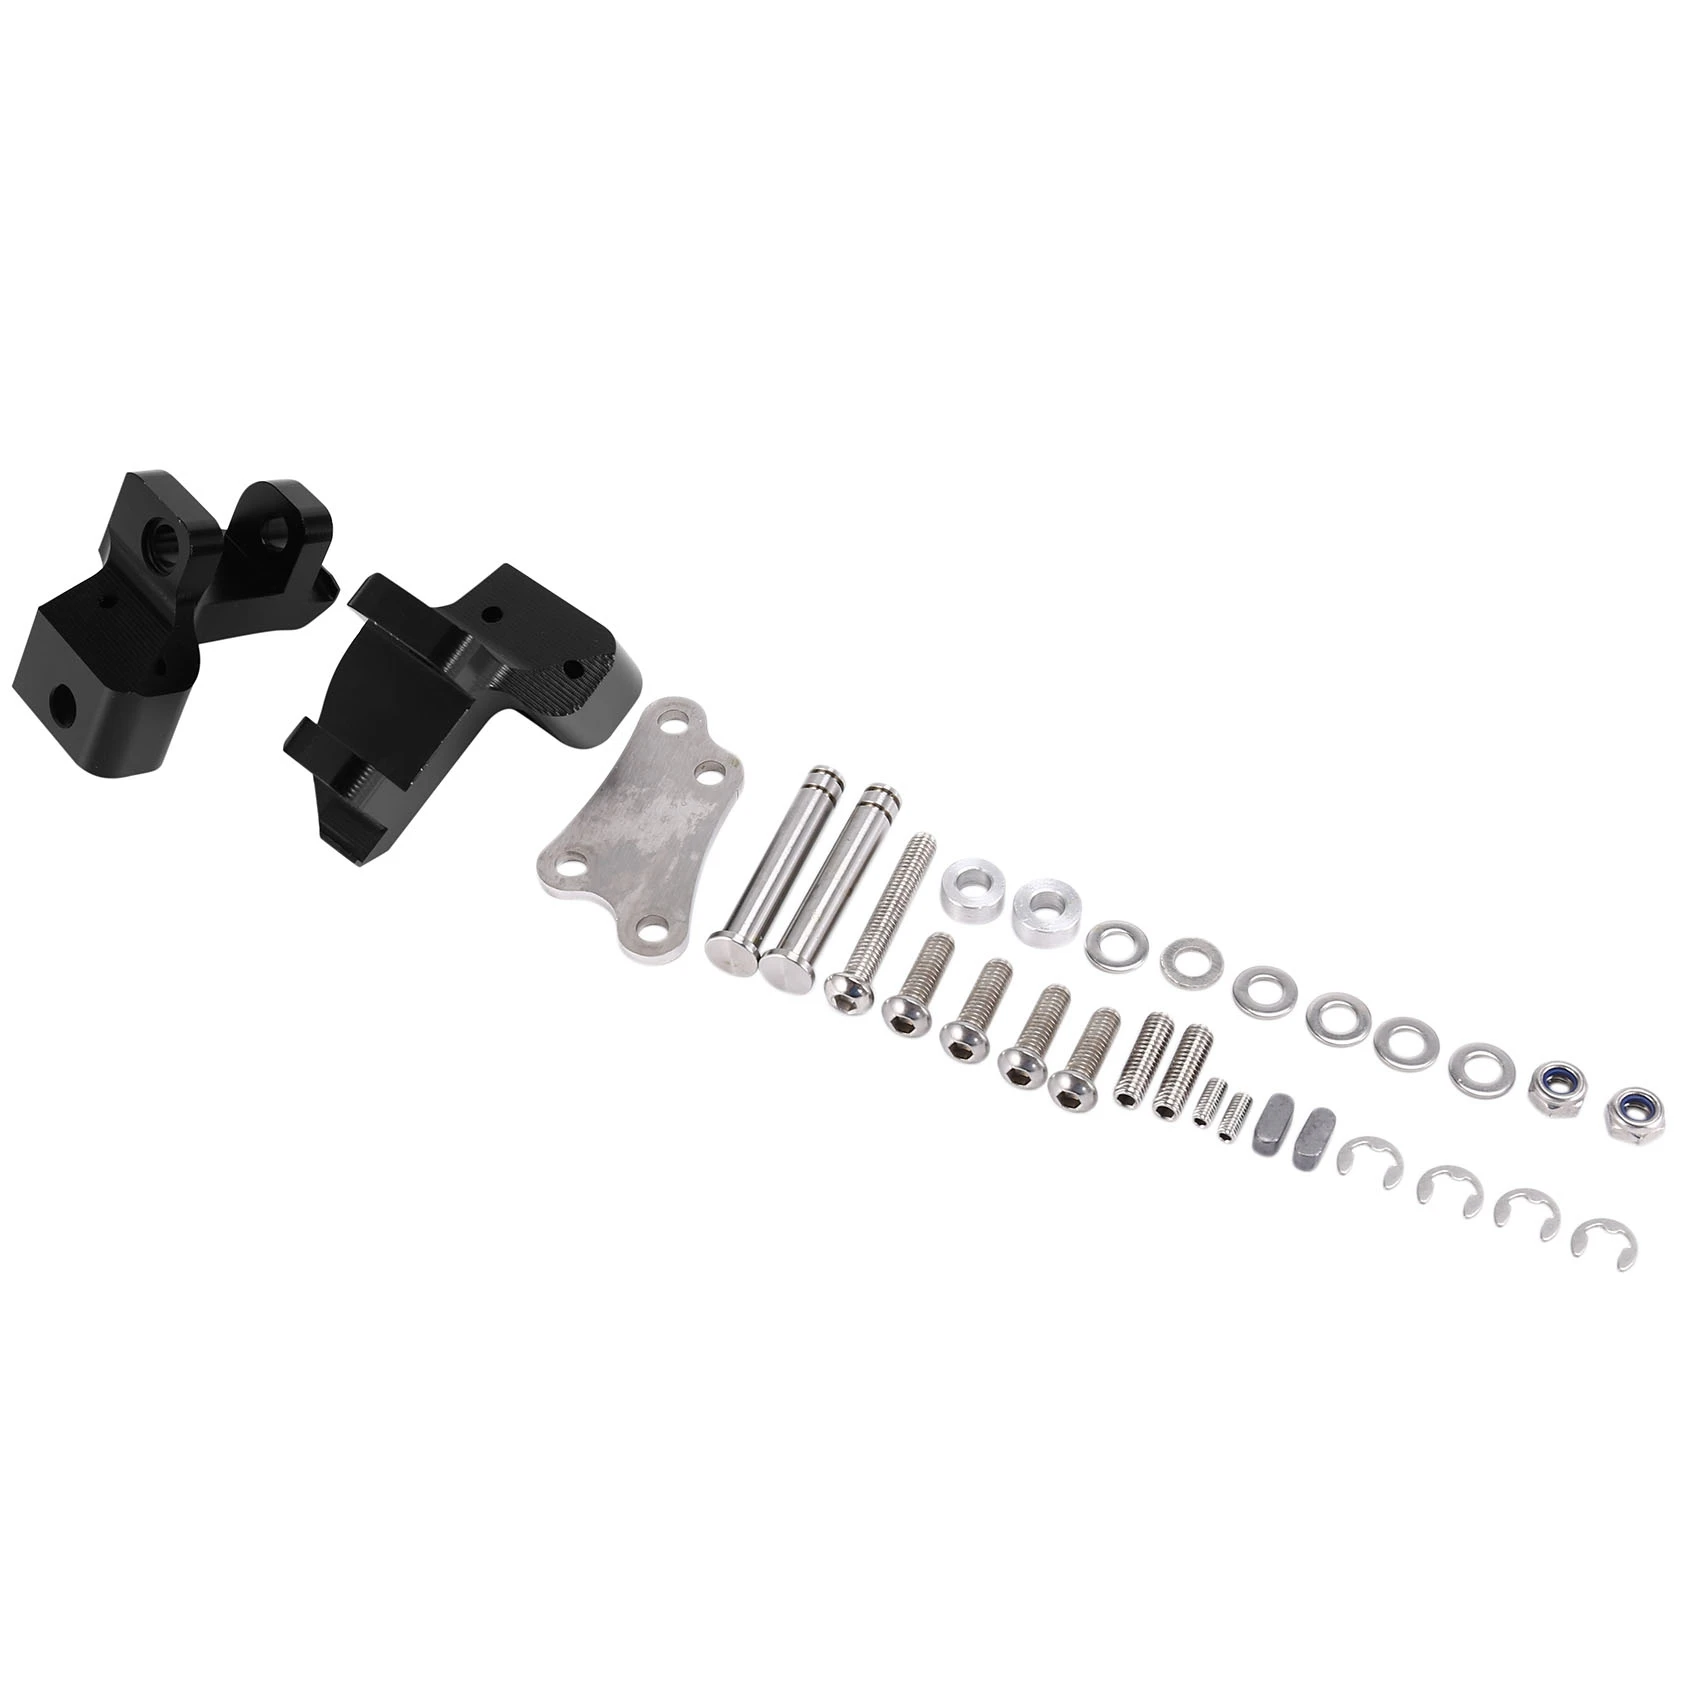 

Motorcycle Driver Footrest Relocation Rider Foot Pegs Footpeg Lowering Kit for-BMW R1200RT R 1200 RT -2013(Black)